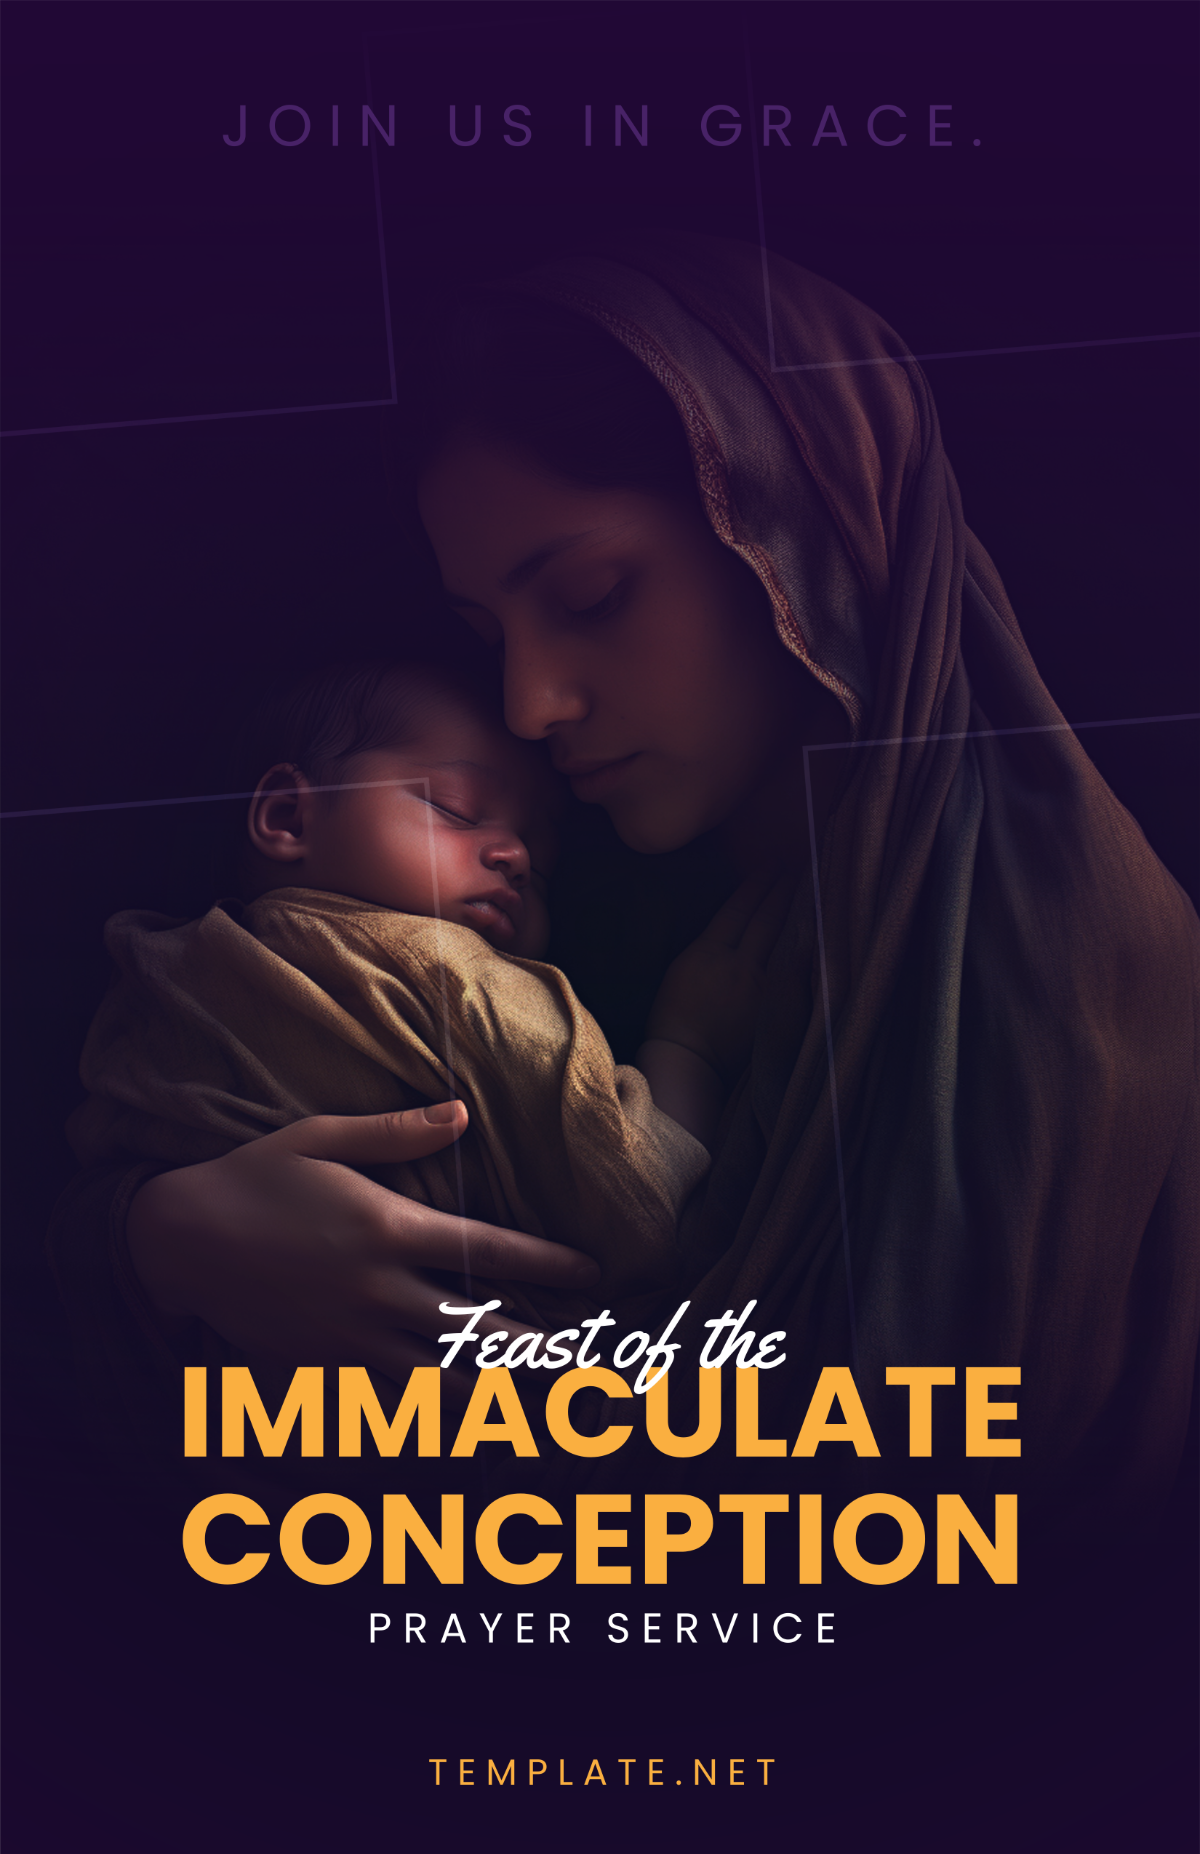 Feast of Immaculate Conception Prayer Service Poster